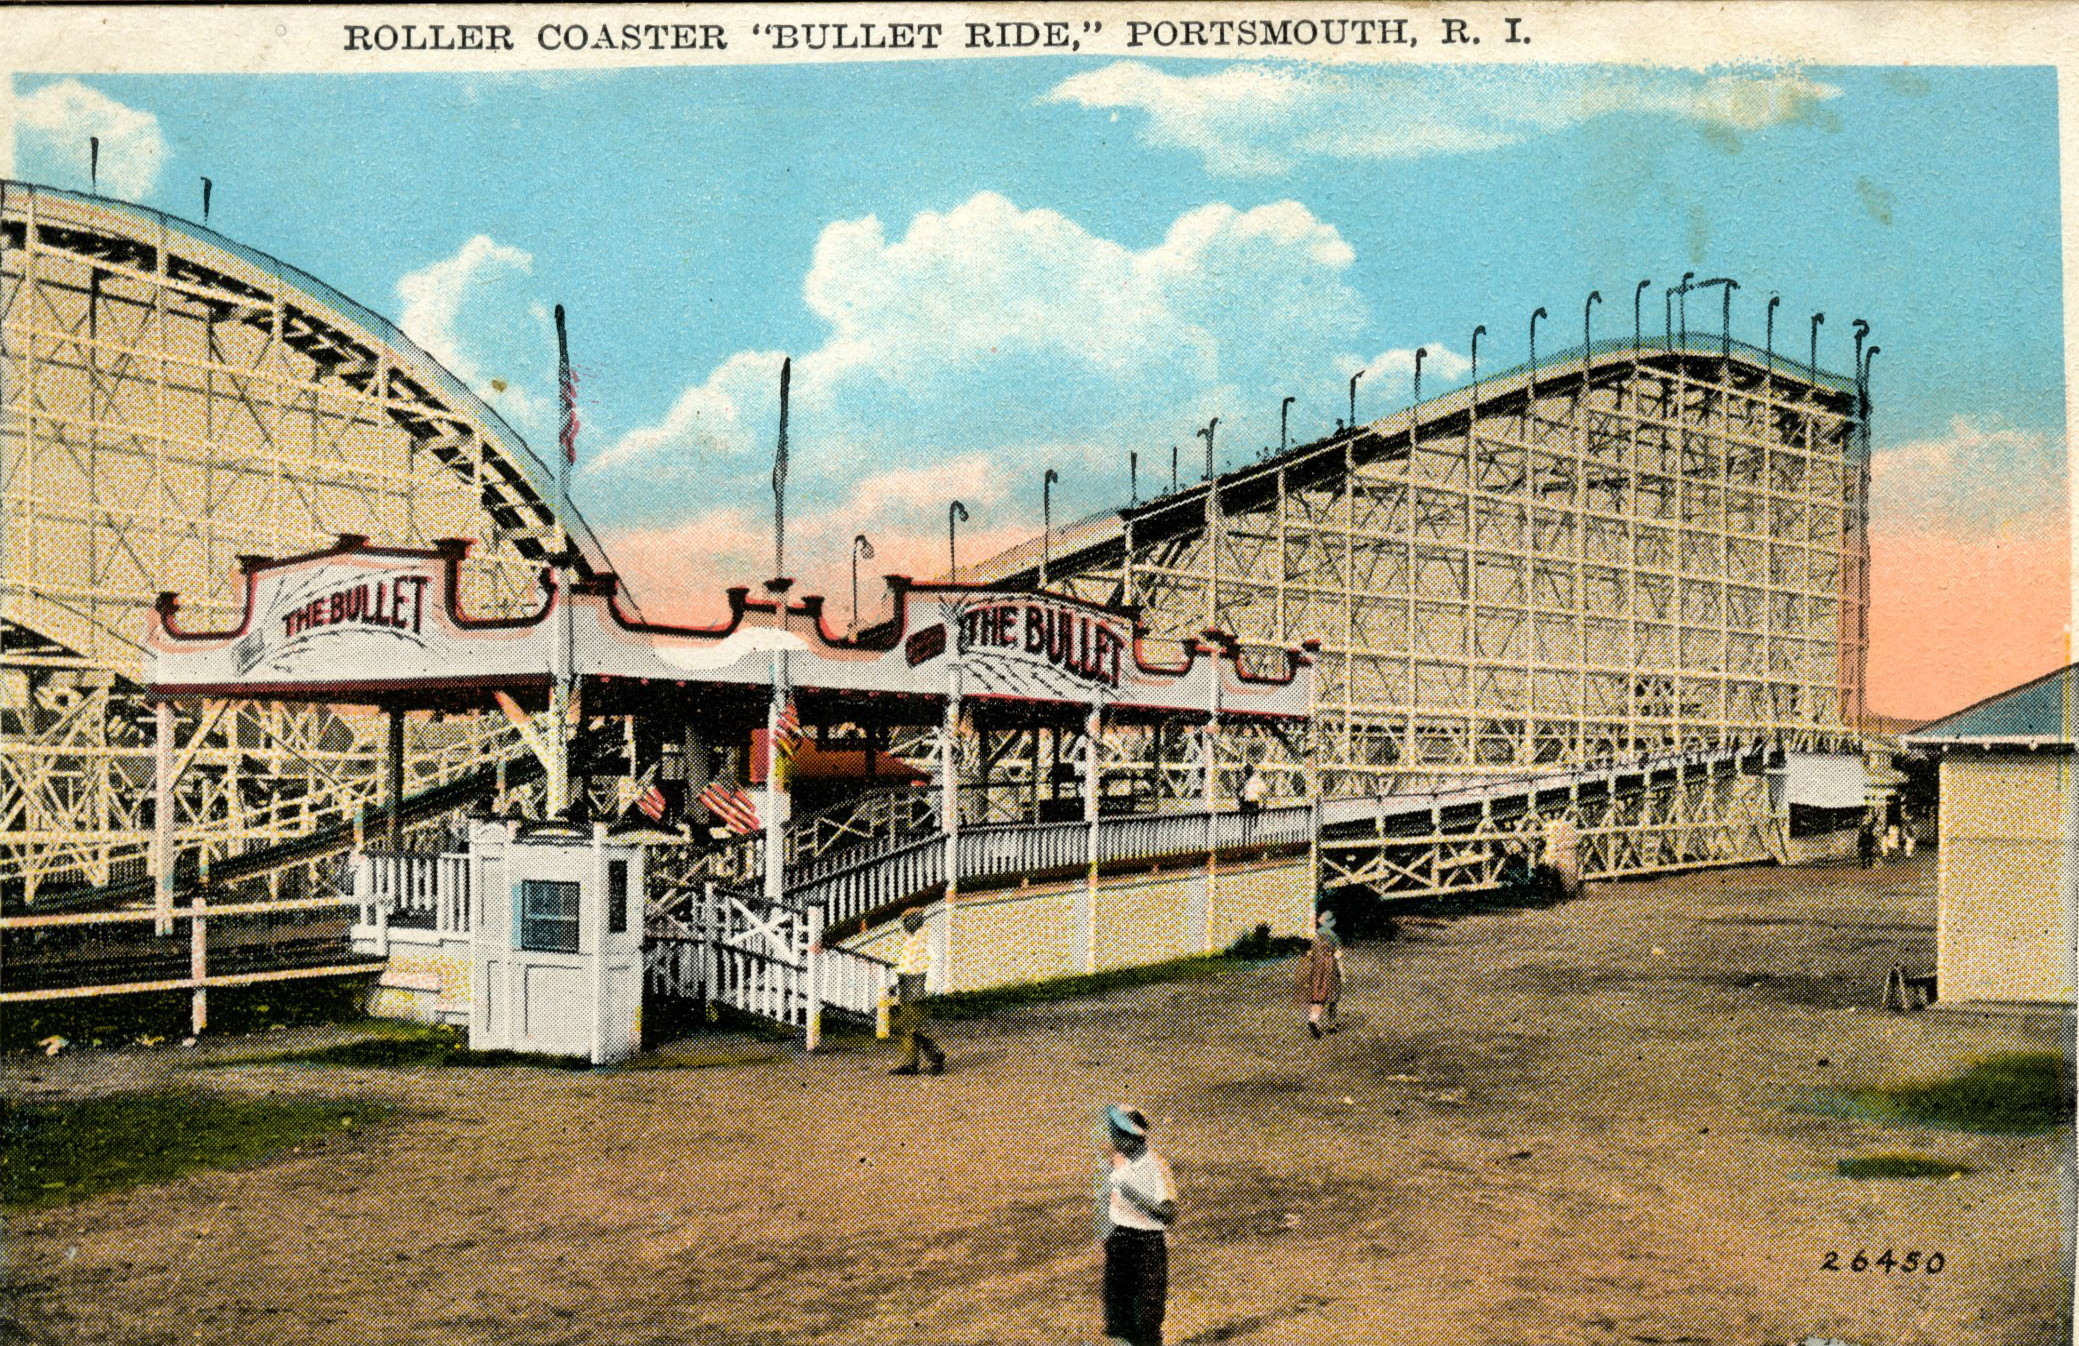 This vintage, colorized postcard of “The Bullet,” the Island Park amusement park’s famed rollercoaster, is from Town Historian Jim Garman’s collection.